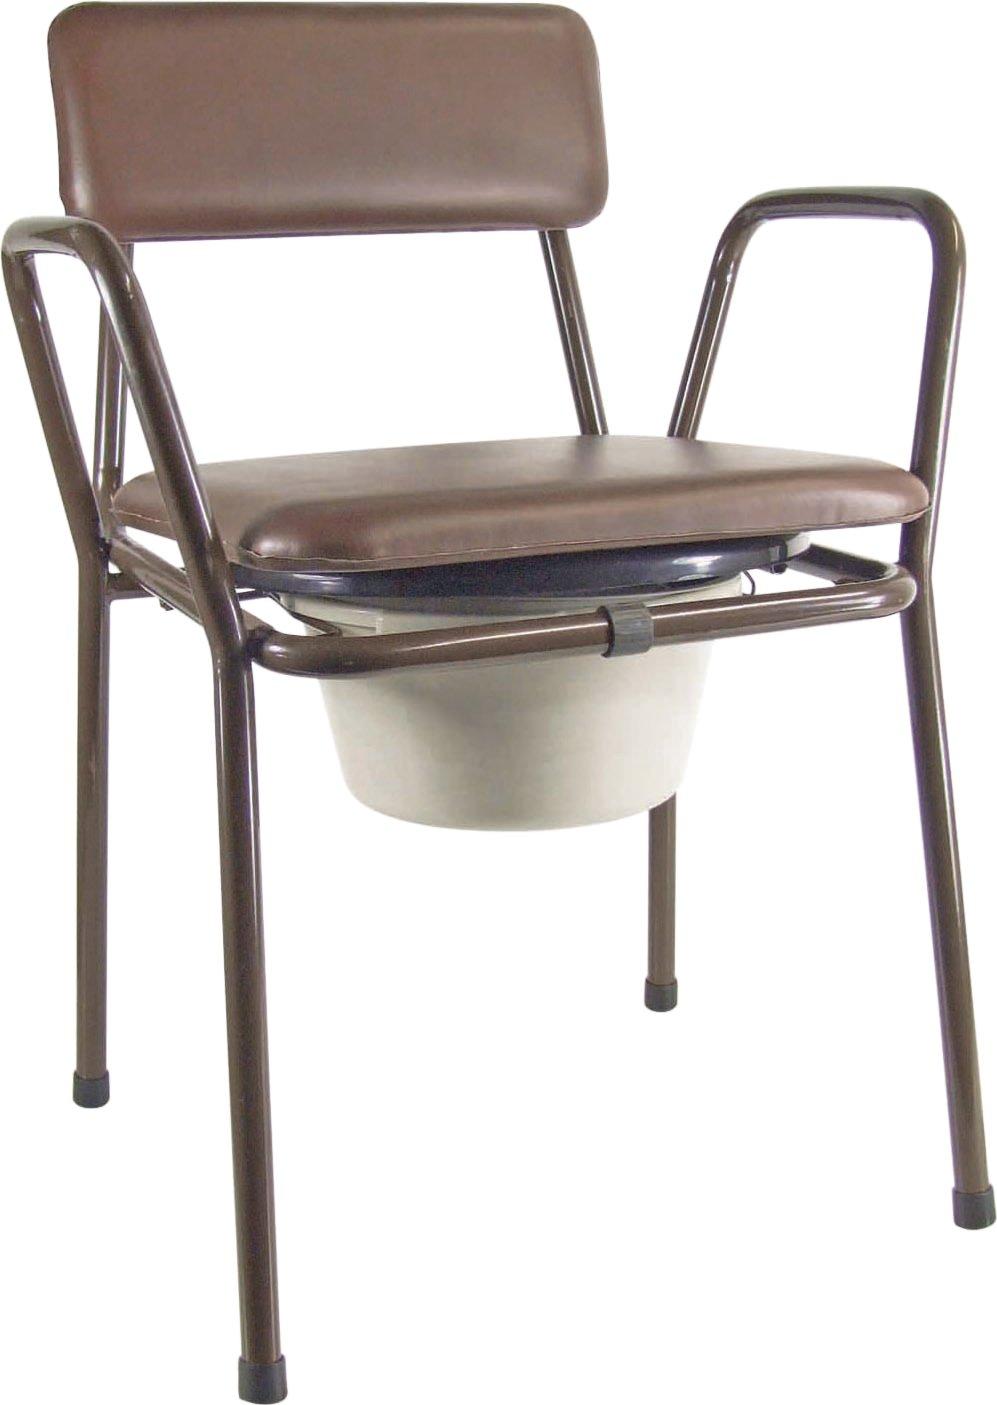 Kent Stacking Commode Chair Brown